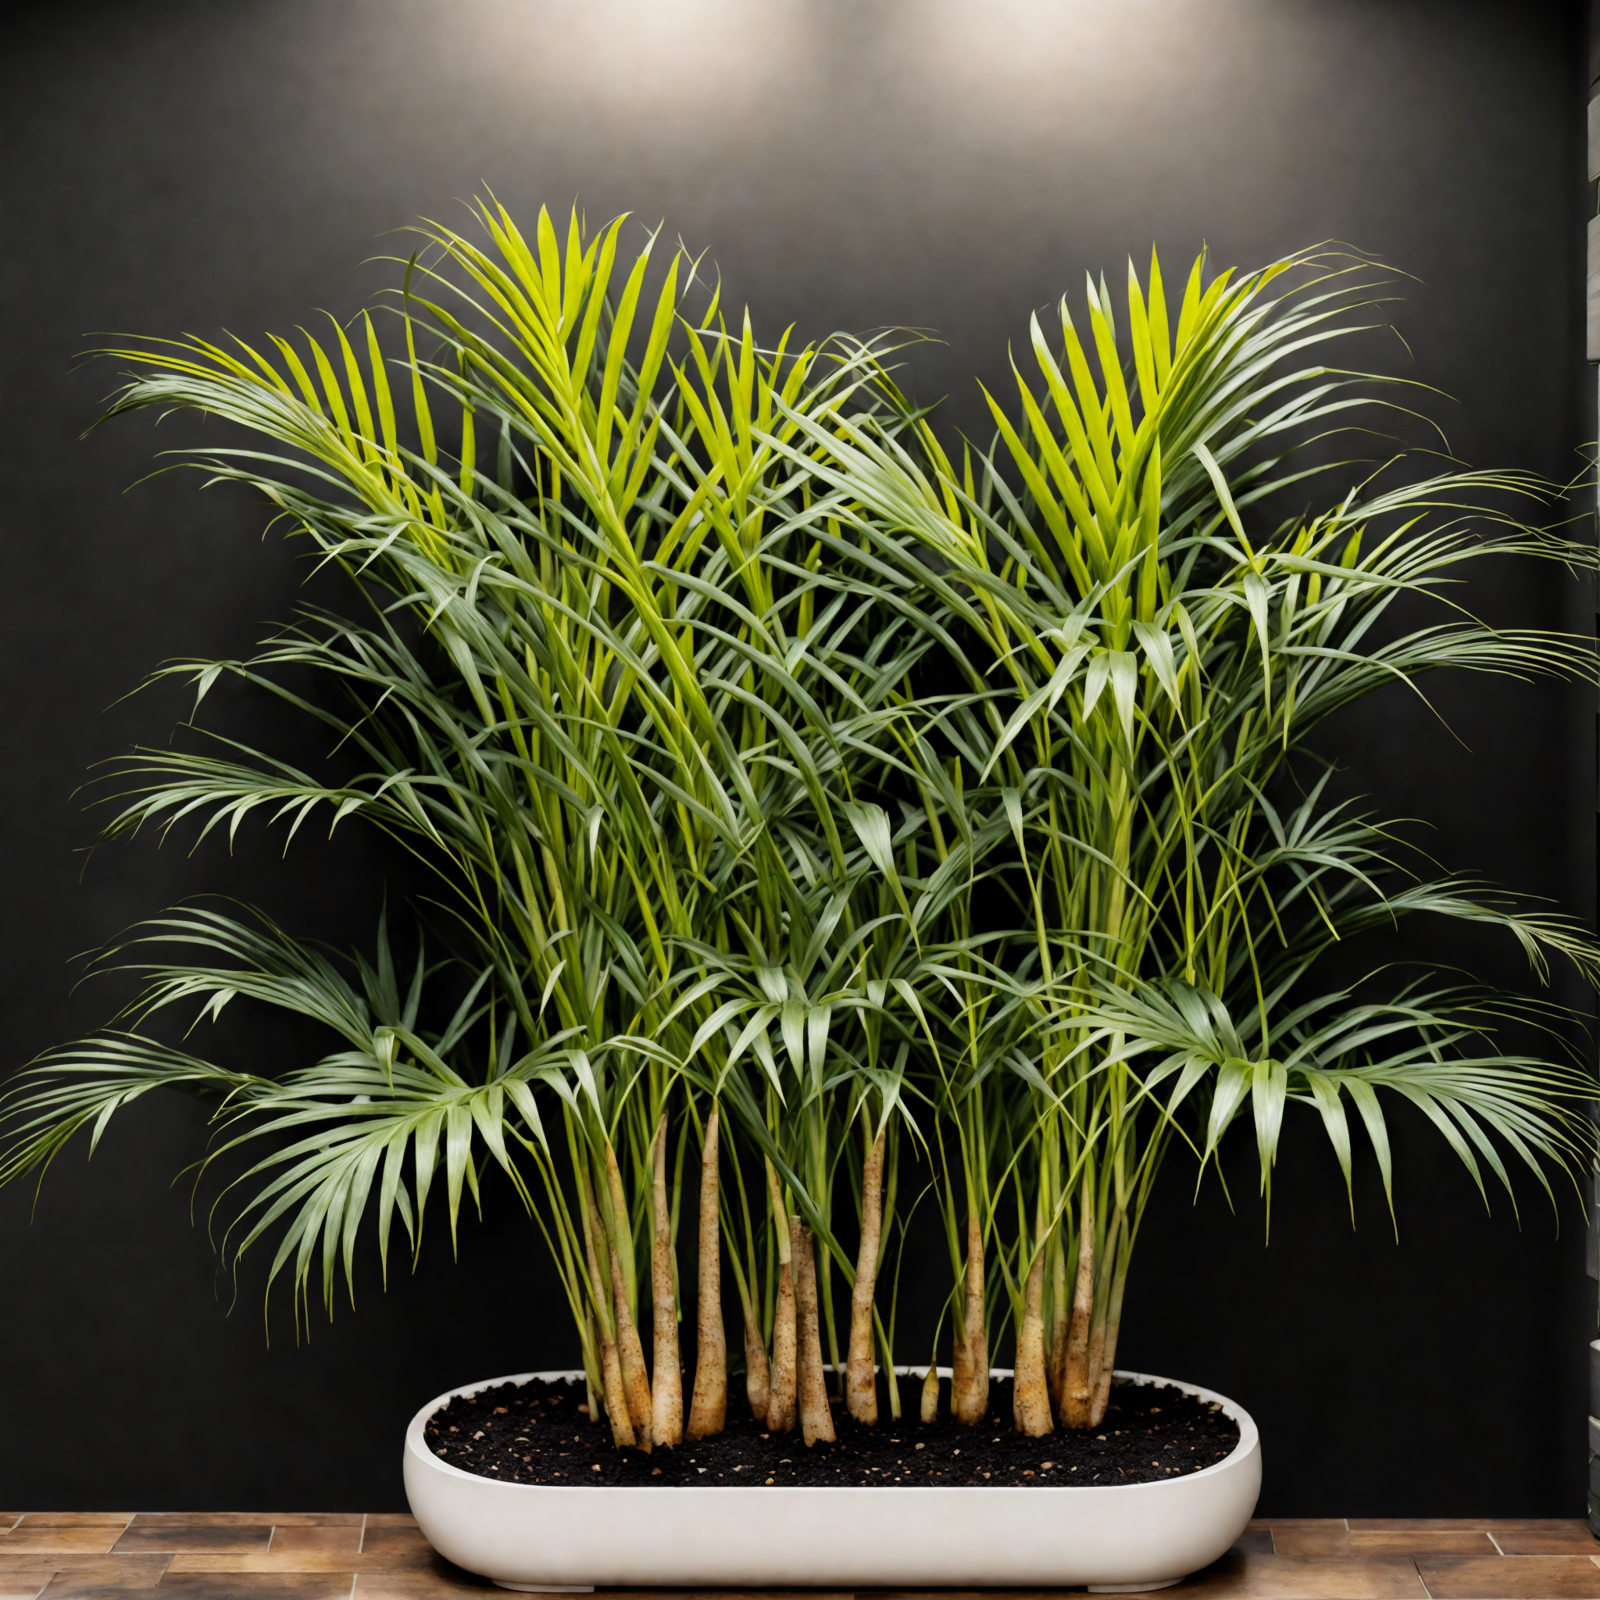 Dypsis lutescens in a vase on a wood floor, with clear lighting and a dark background.